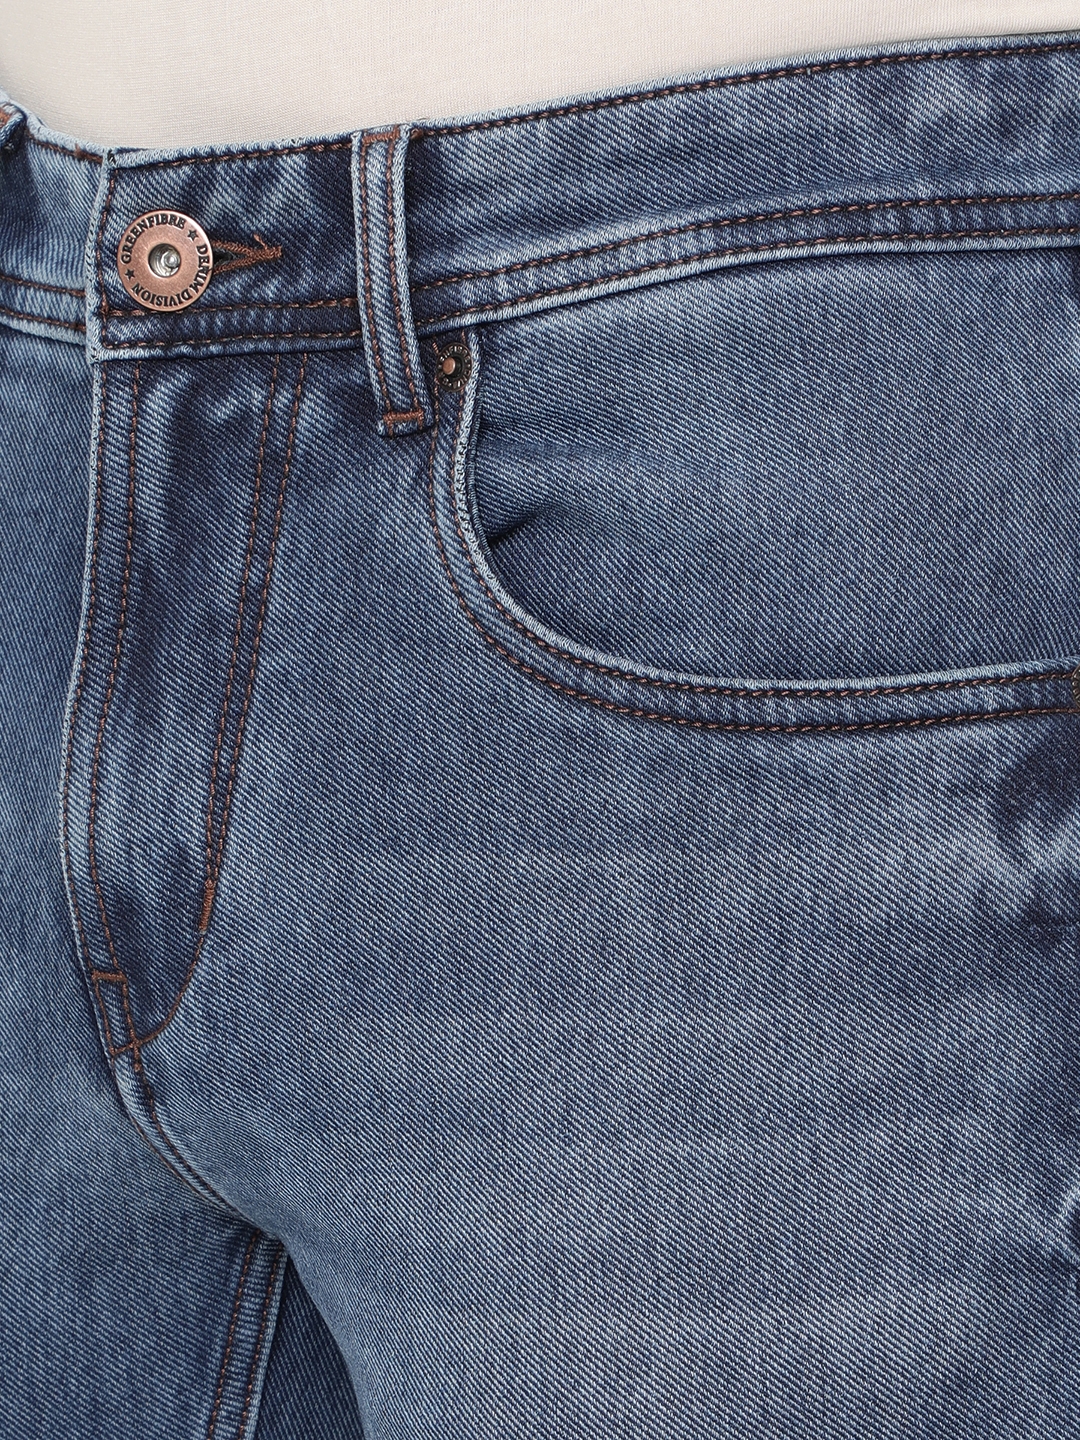 Greenfibre | Ink Blue Washed Narrow Fit Jeans | Greenfibre 4